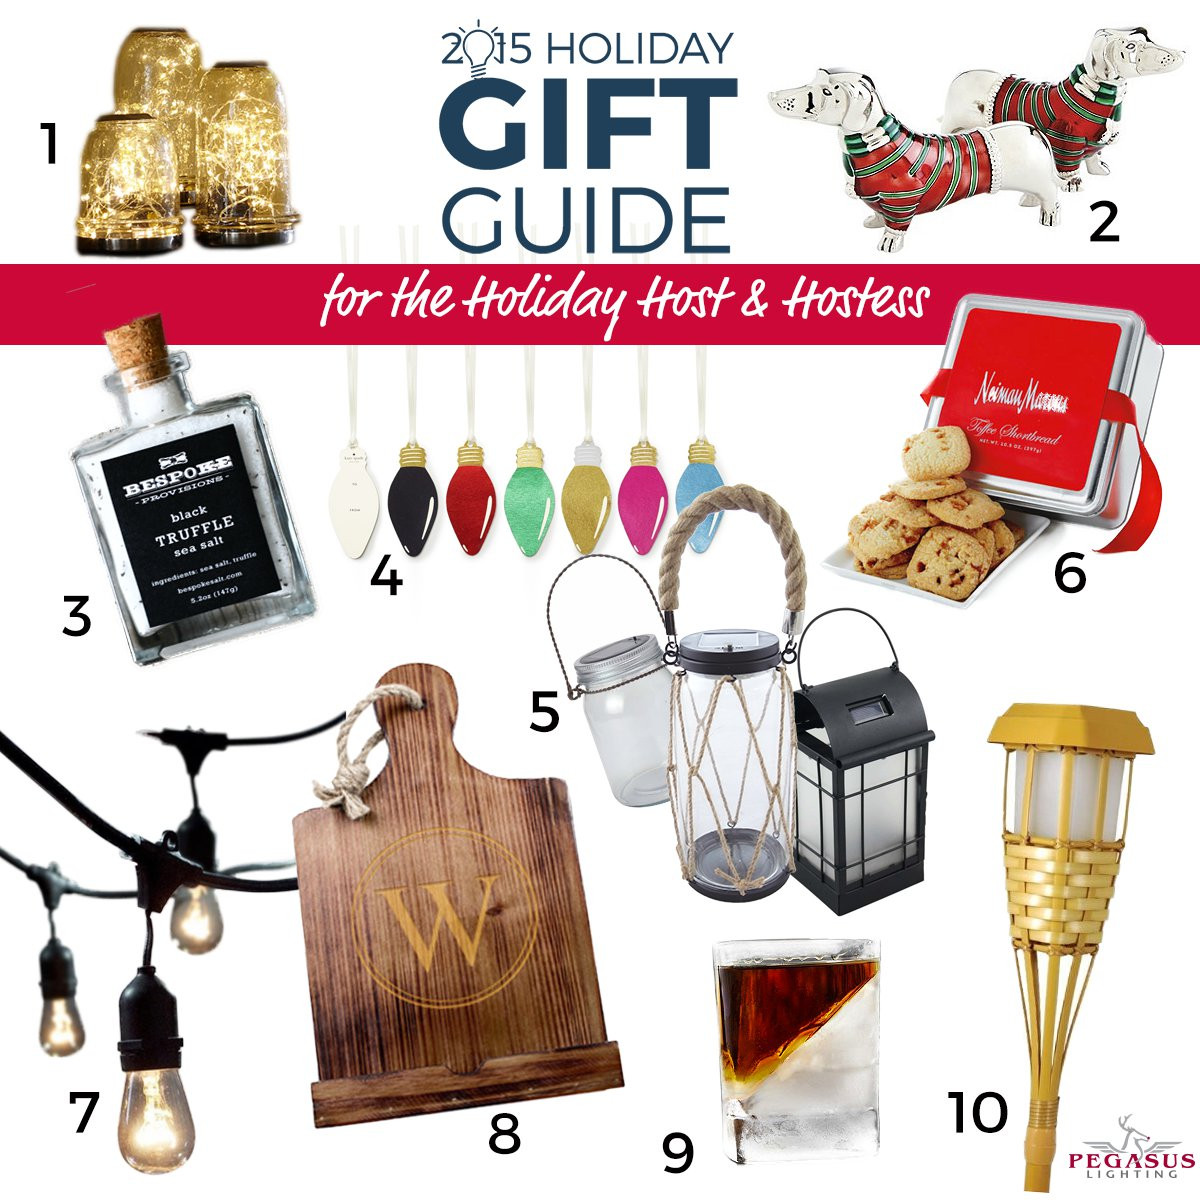 Holiday Party Host Gift Ideas
 Holiday Gift Guide Host & Hostess